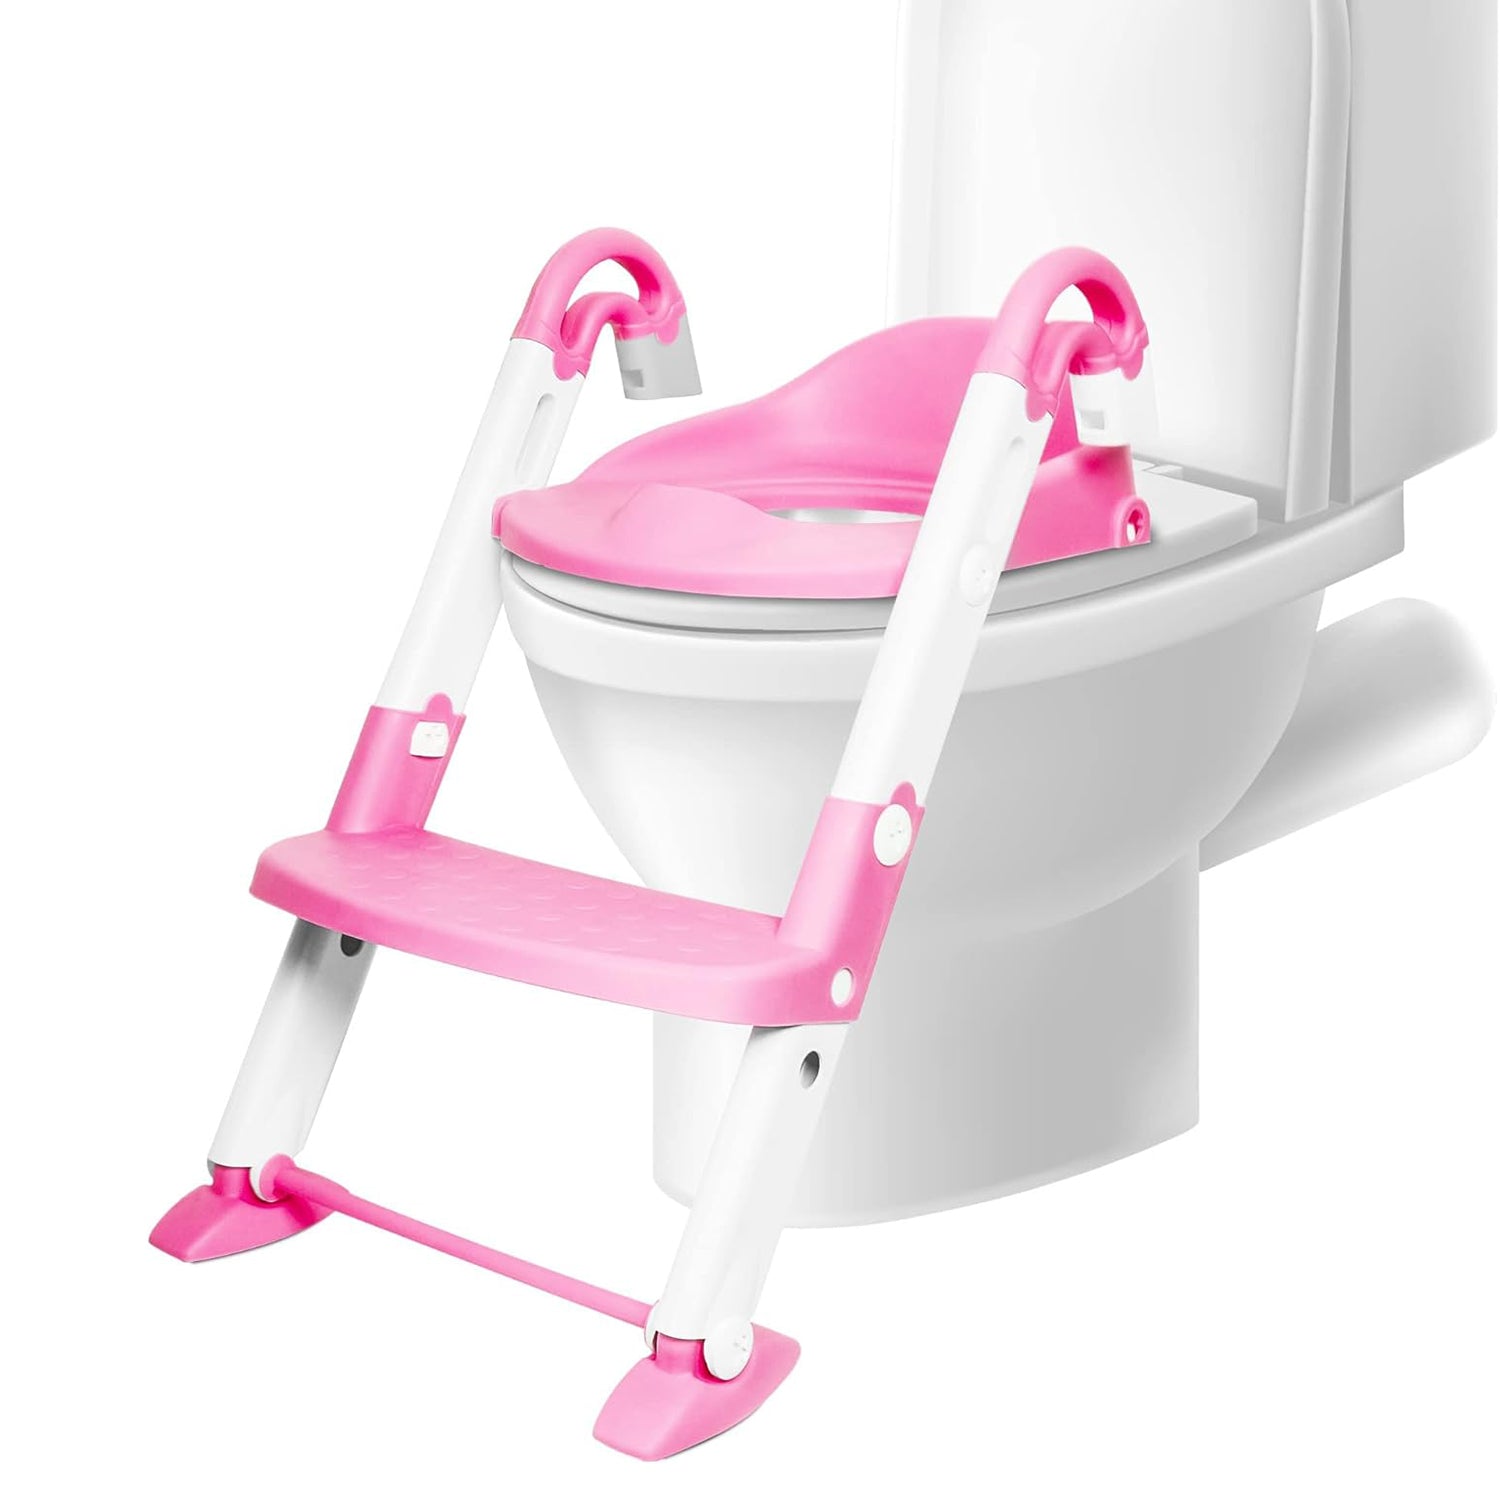 3 in 1 Toddler Potty Training Adjustable Toilet Seat with Non-Slip Step Stool, Pink